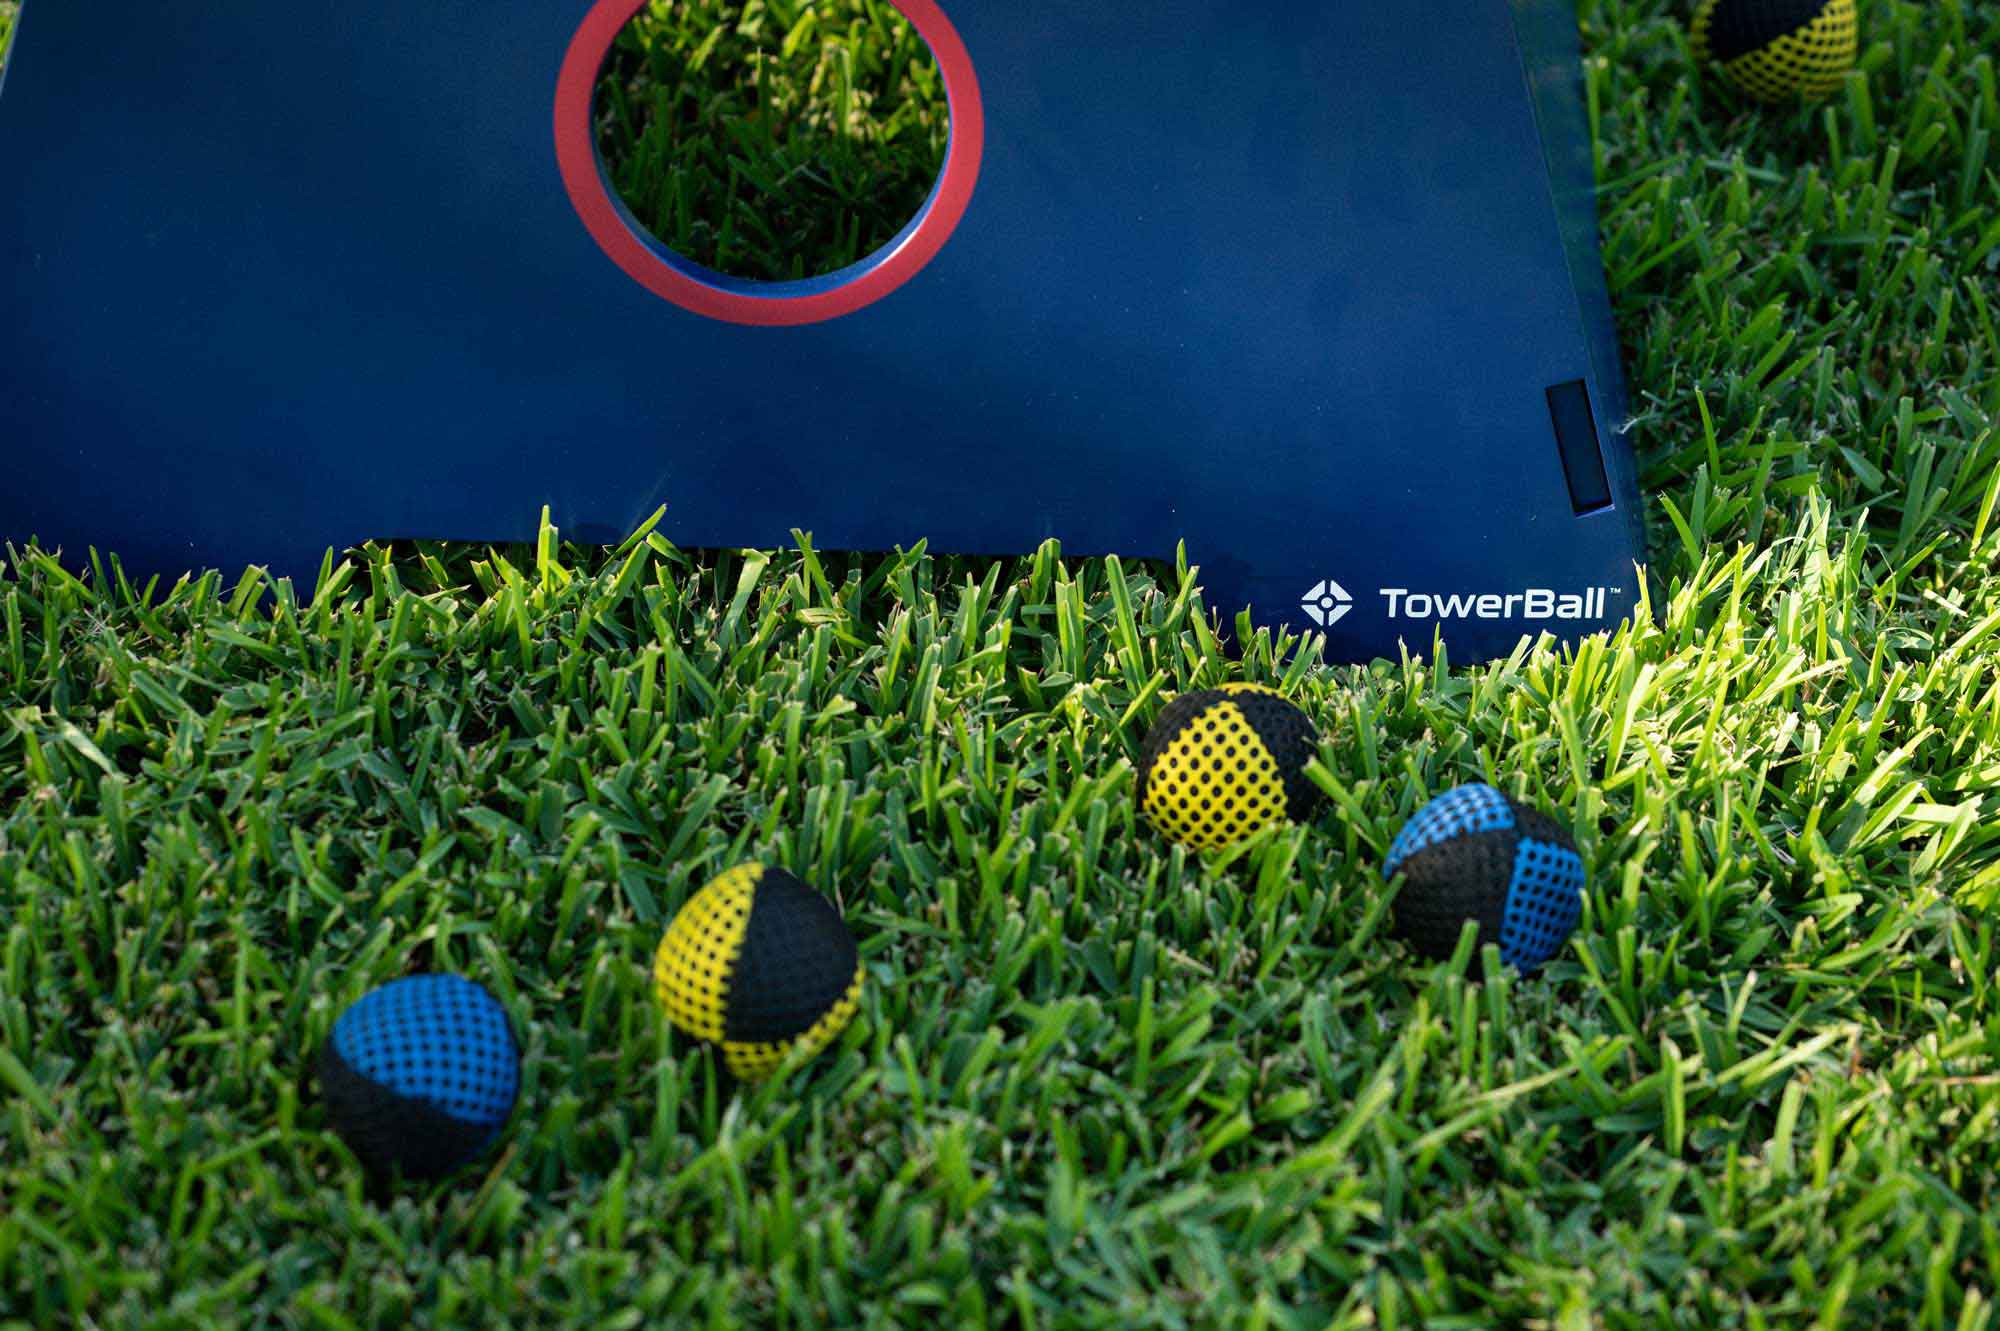 TowerBall backyard game with balls in grass